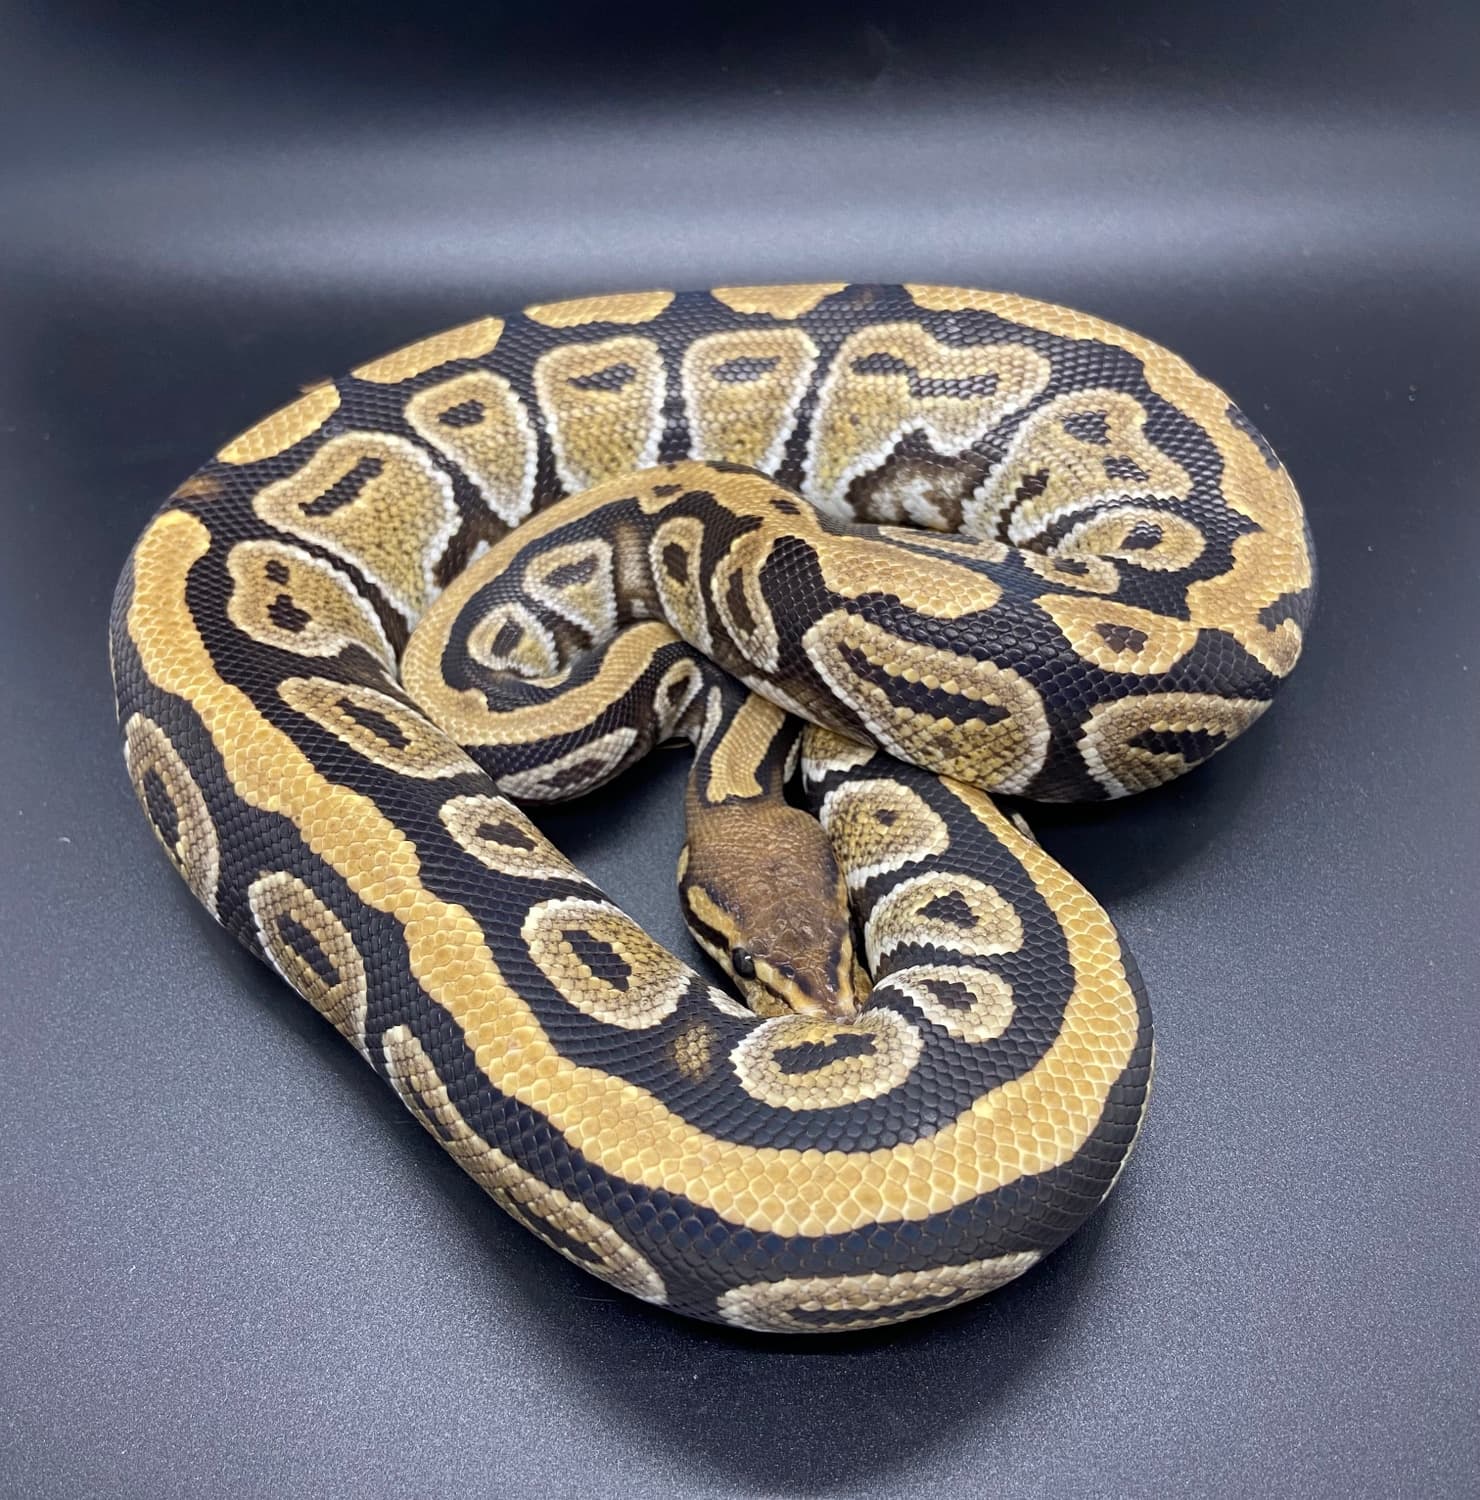 Cypress Ball Python by Hail The Scale